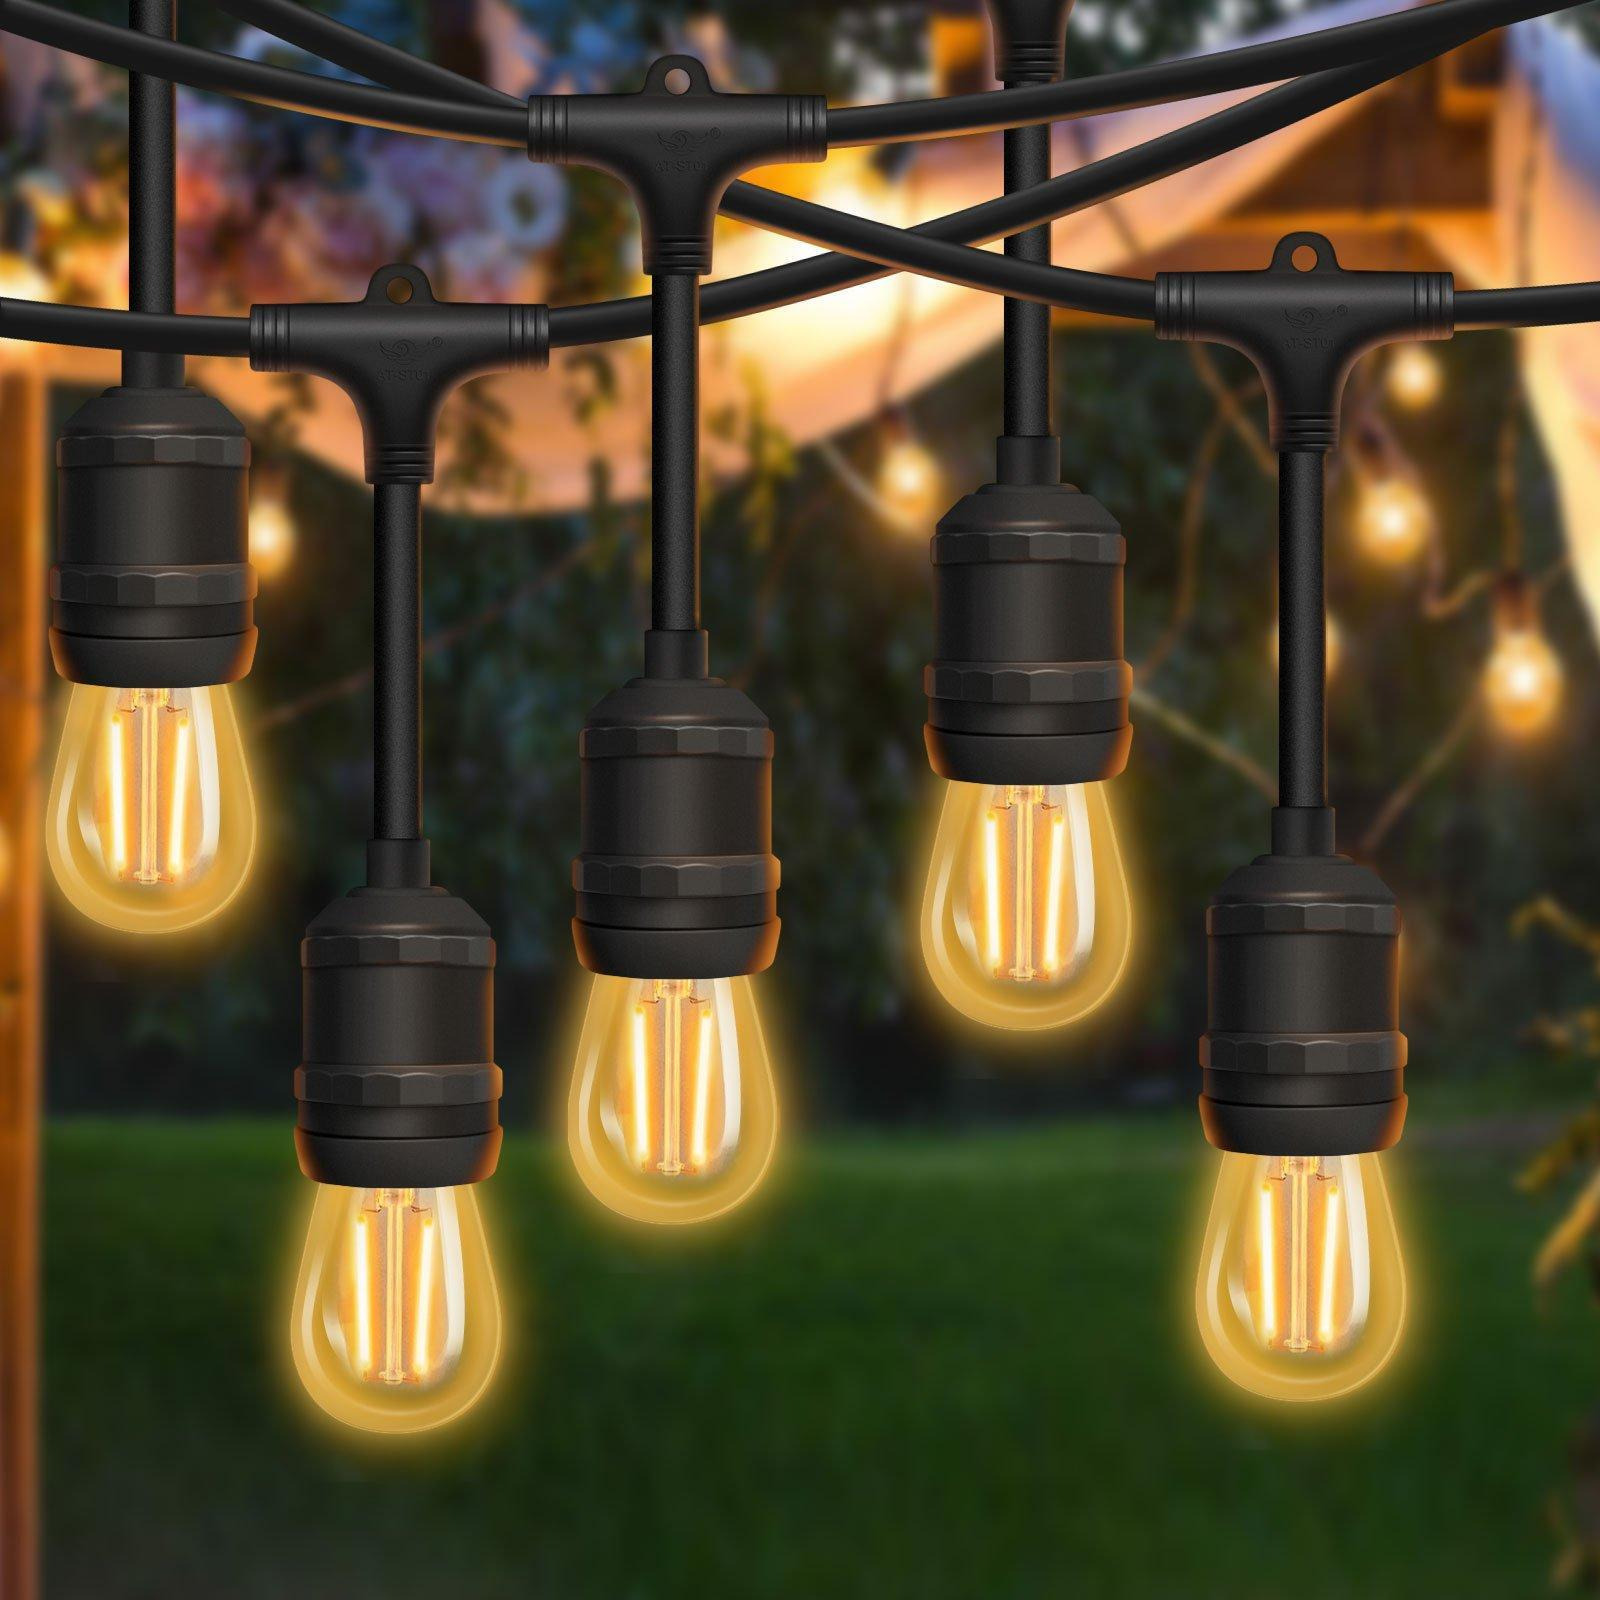 10M Drop Outdoor Garden String Lights with 15 Sockets E27 Holder, IP65 Commercial-Grade (Bulb not included) - image 1